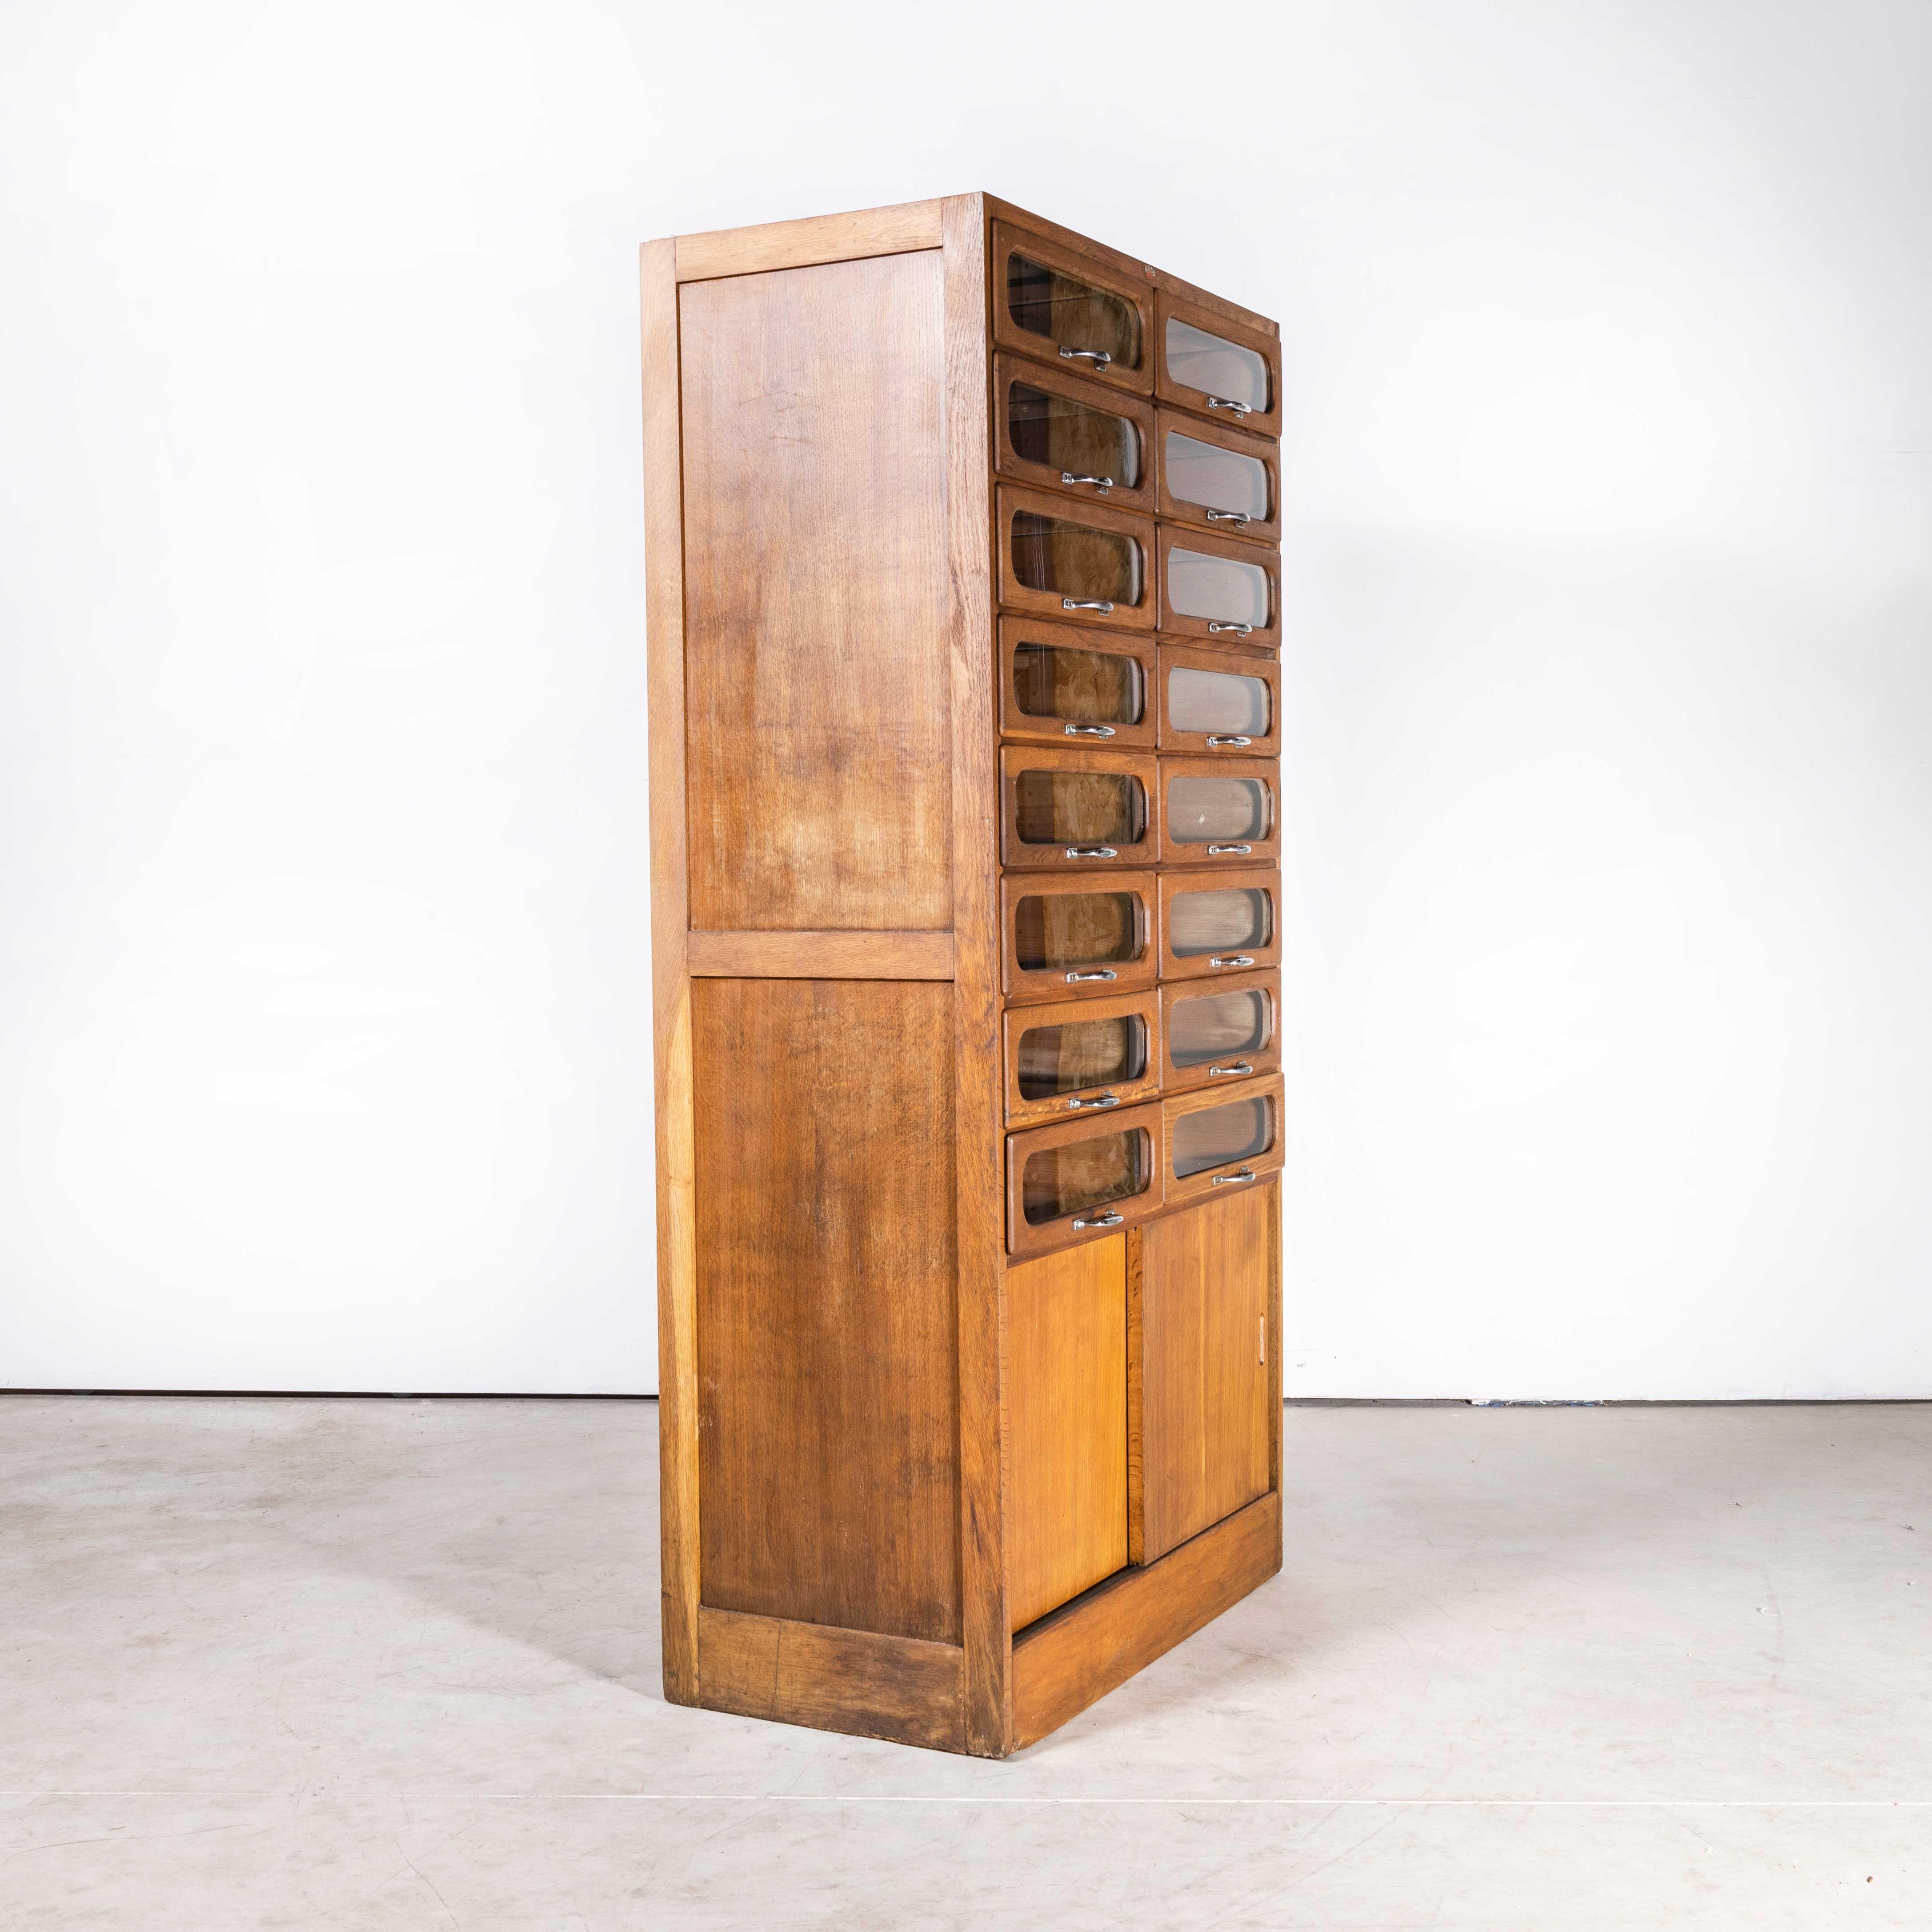 1950s Tall Haberdashery Cabinet – Sixteen Drawer (Model 2525)
1950s Tall Haberdashery Cabinet – Sixteen Drawer. Founded in 1848 as a private cabinetmaker, D. Matthews and Son became a limited company in 1931 and was eventually taken over in 1999.